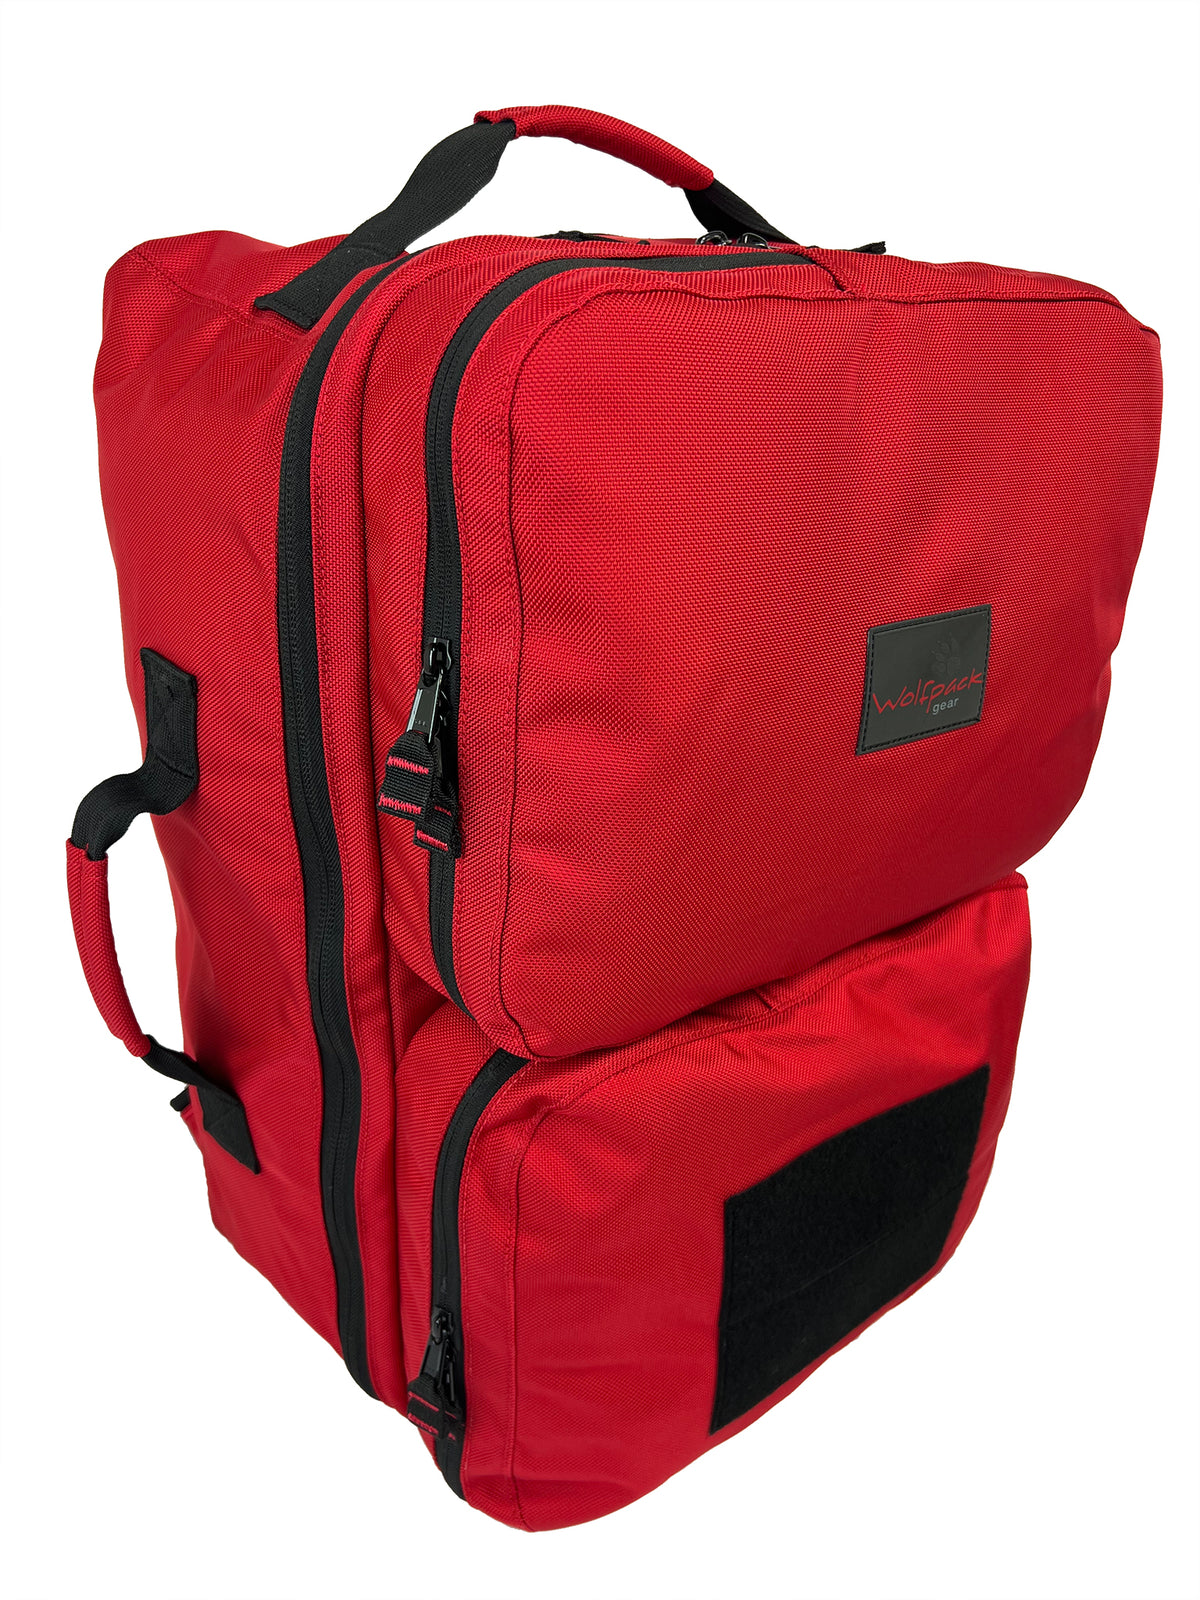 Wolfpack Gear™ Out of County Bag - Red